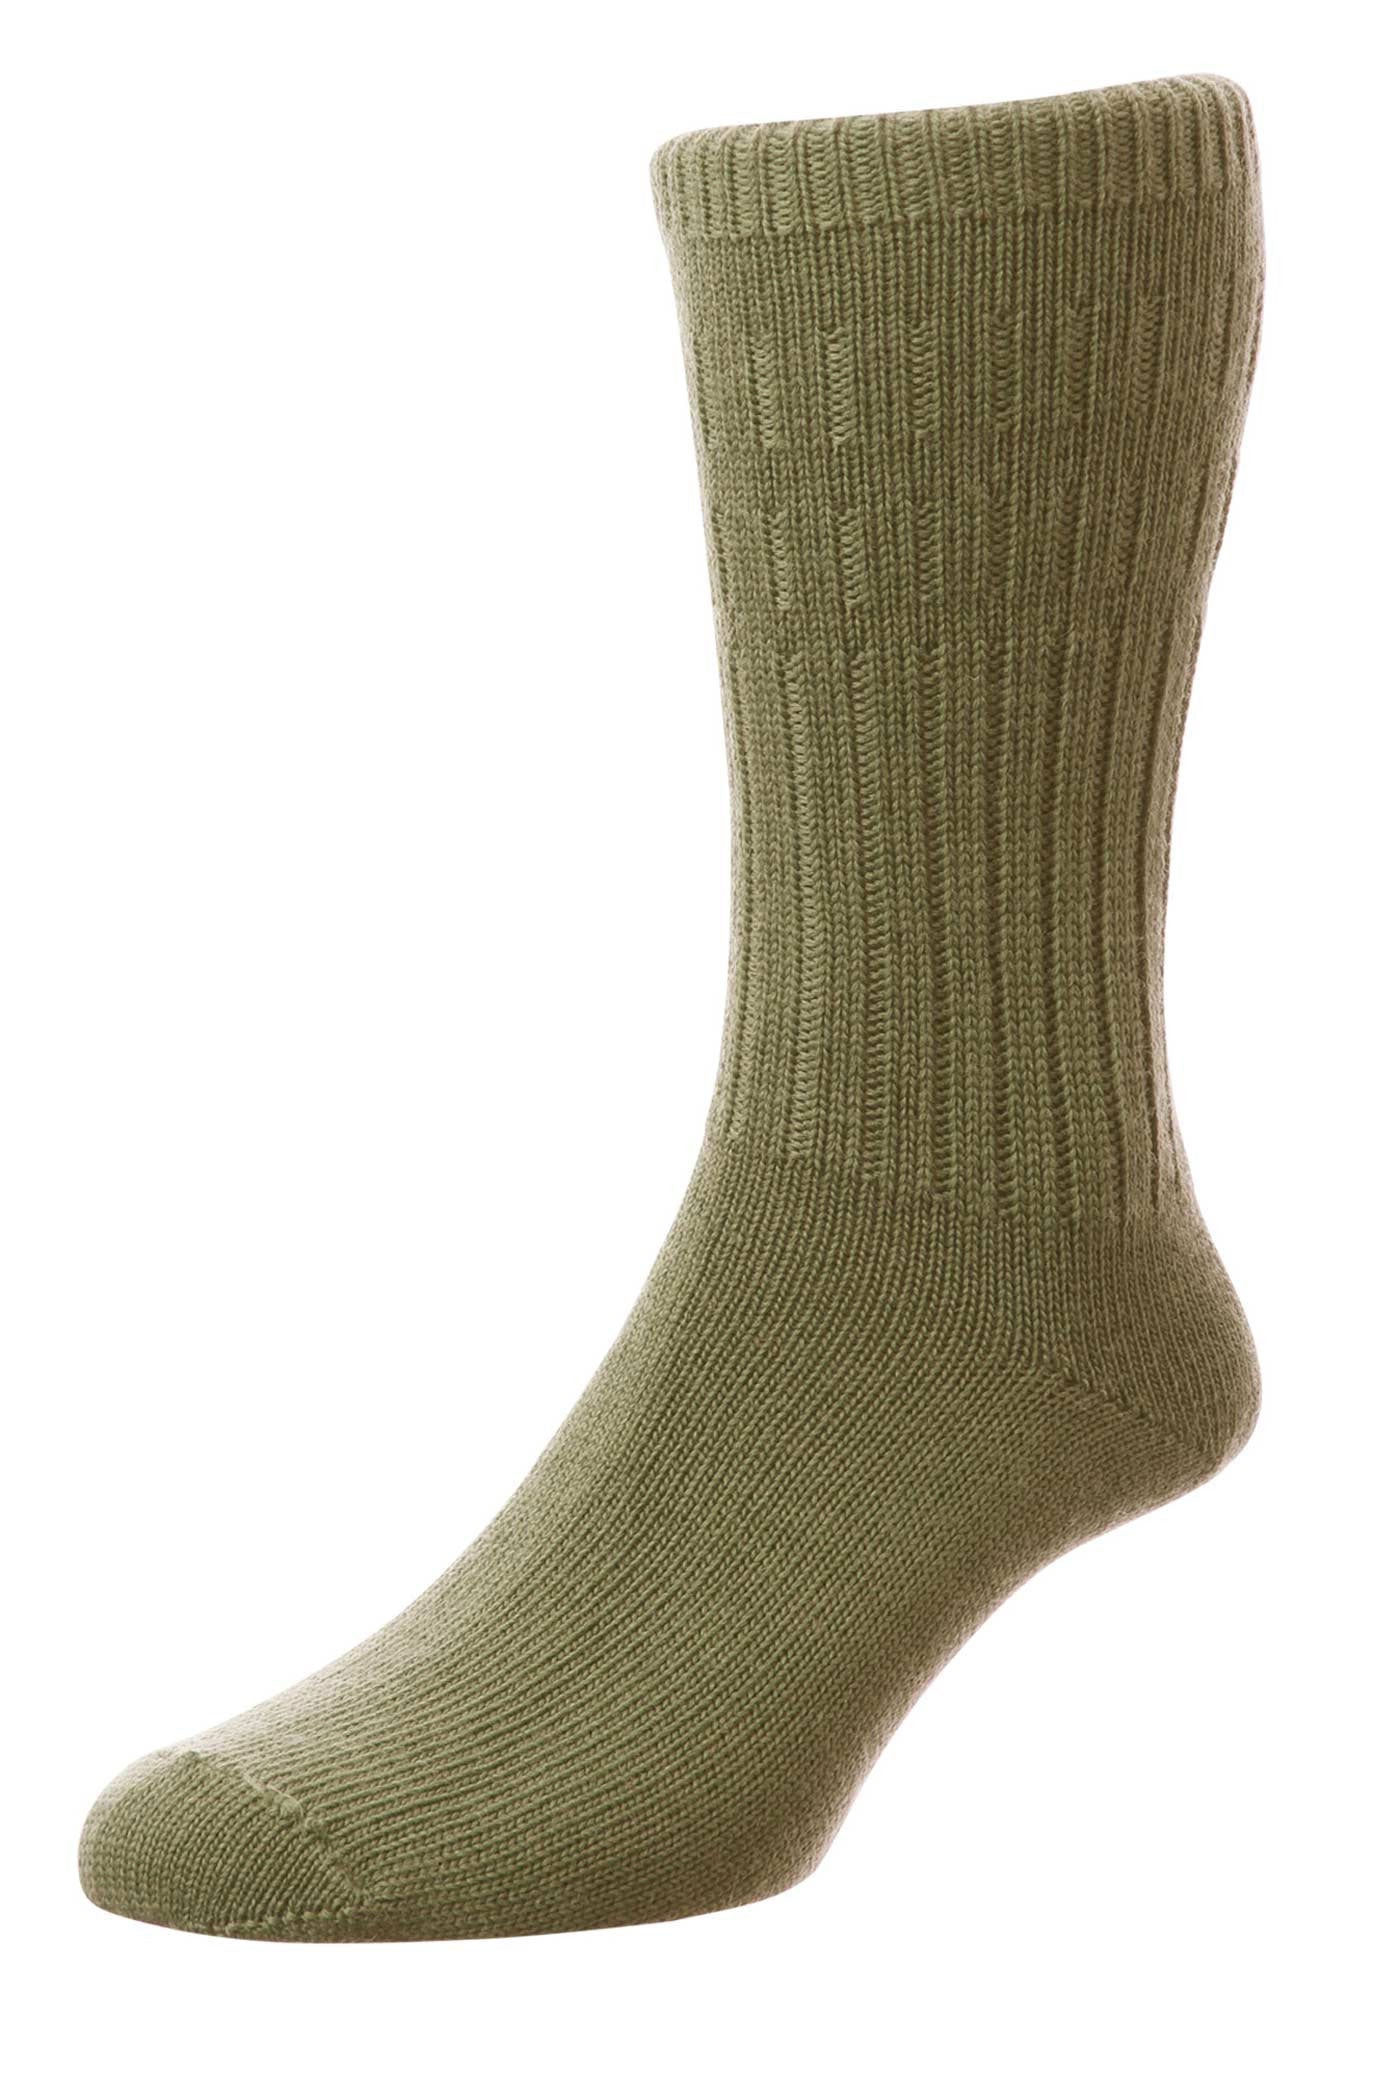 Olive HJ Hall Thermal SoftTop Socks | Wool Rich 